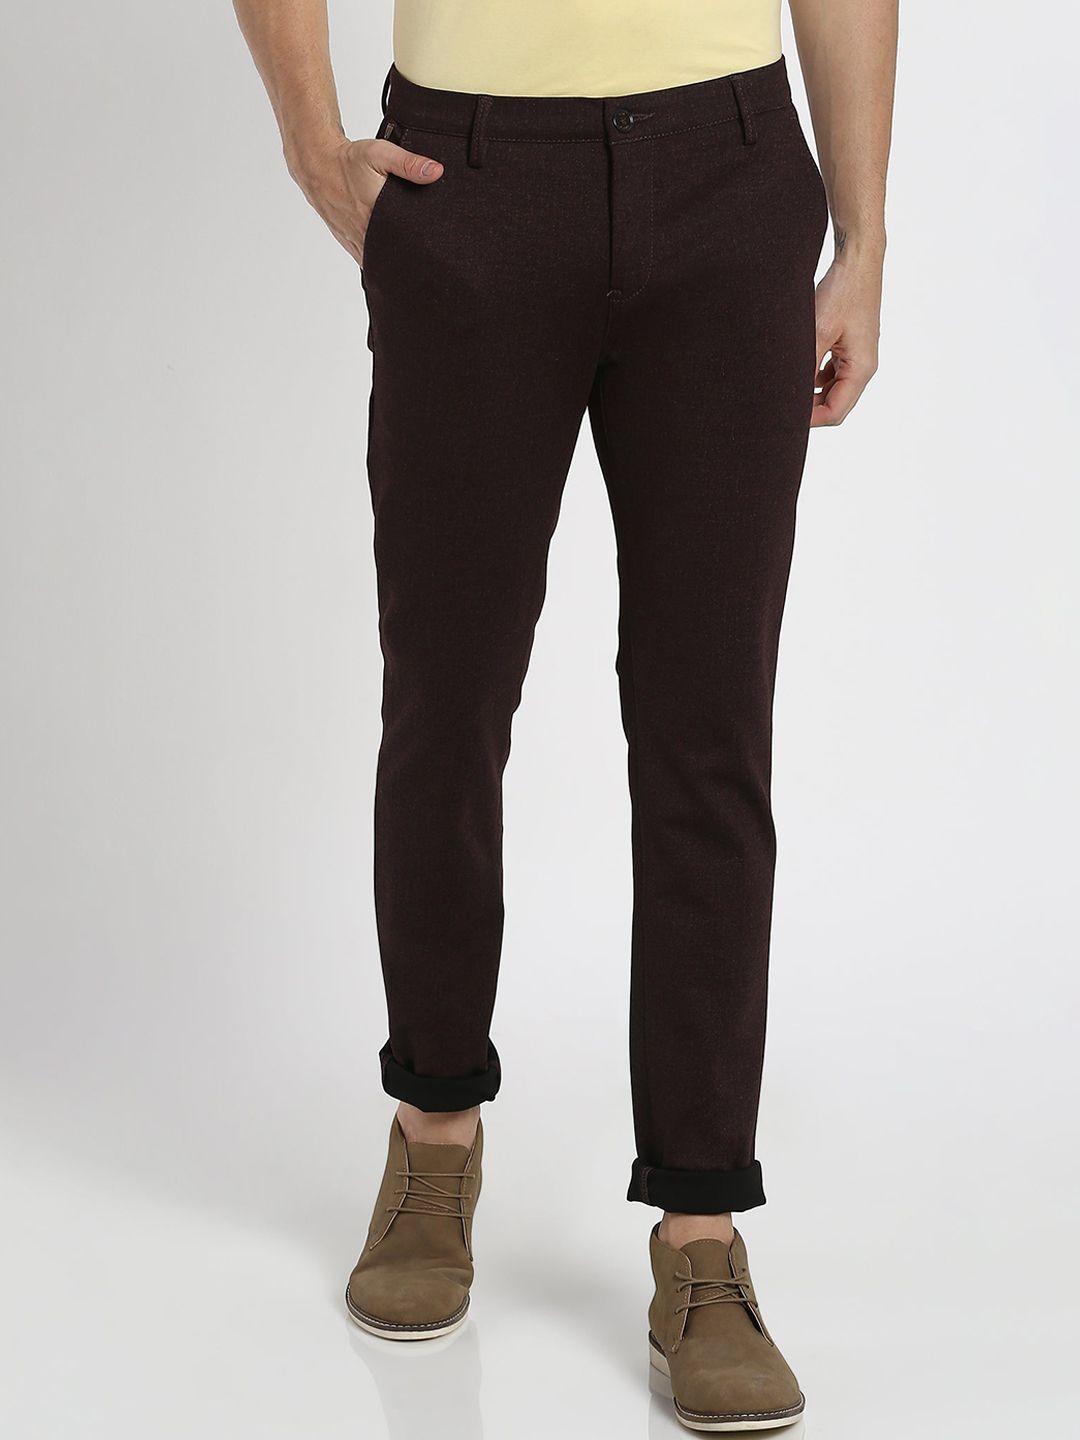 red-flame-men-slim-fit-mid-rise-cotton-stretchable-regular-trousers